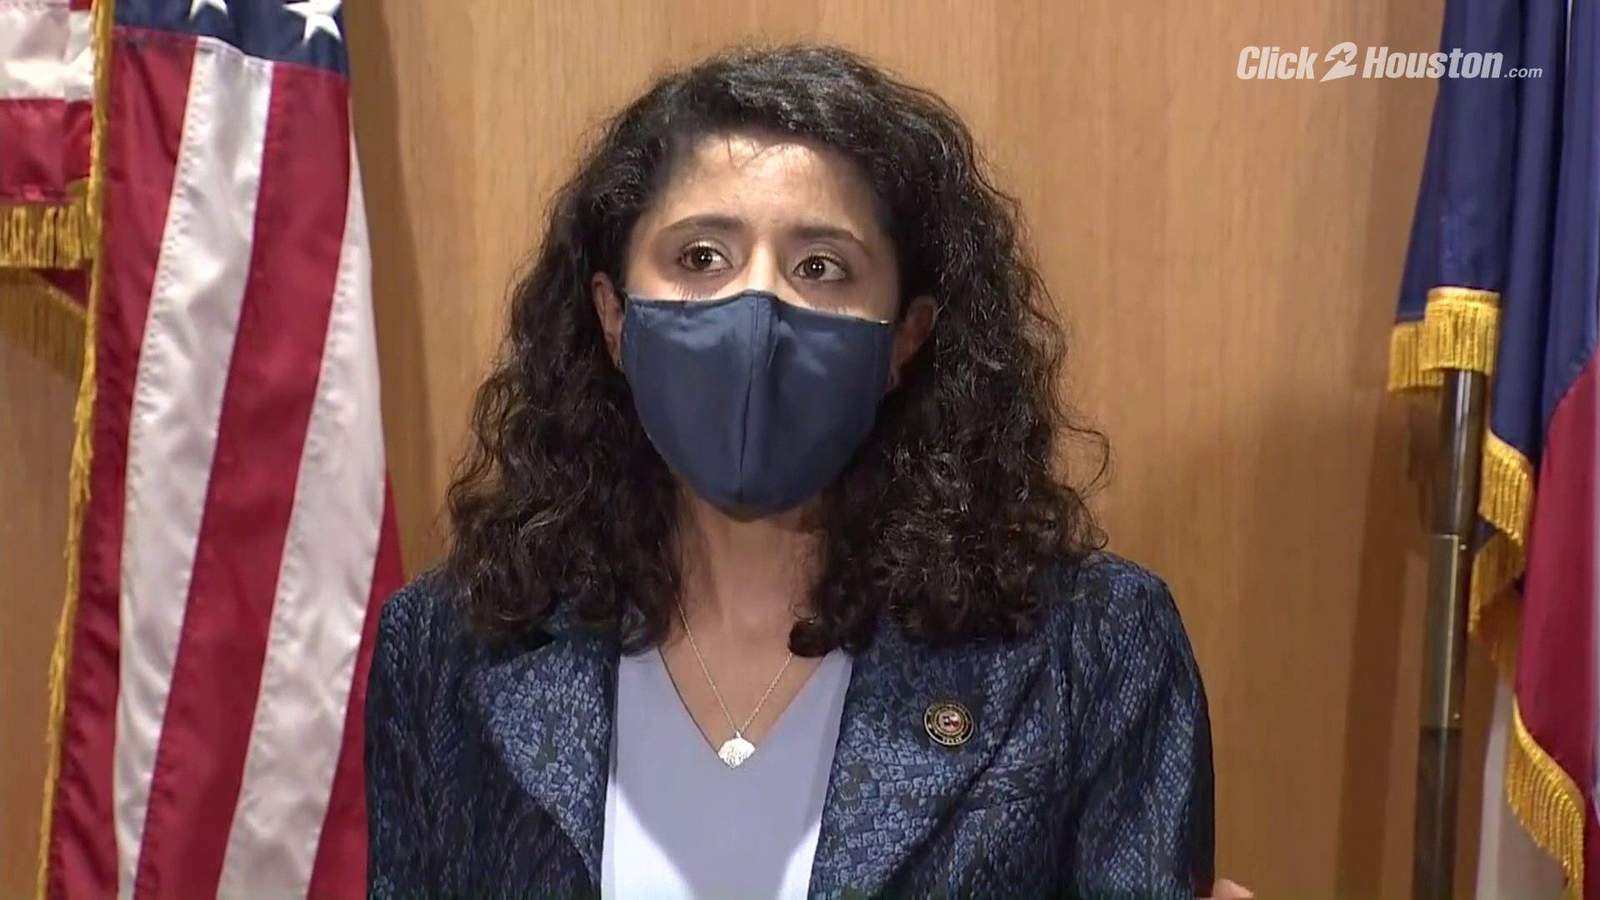 Harris County Judge Lina Hidalgo discusses advertising campaign for COVID-19 vaccine fears